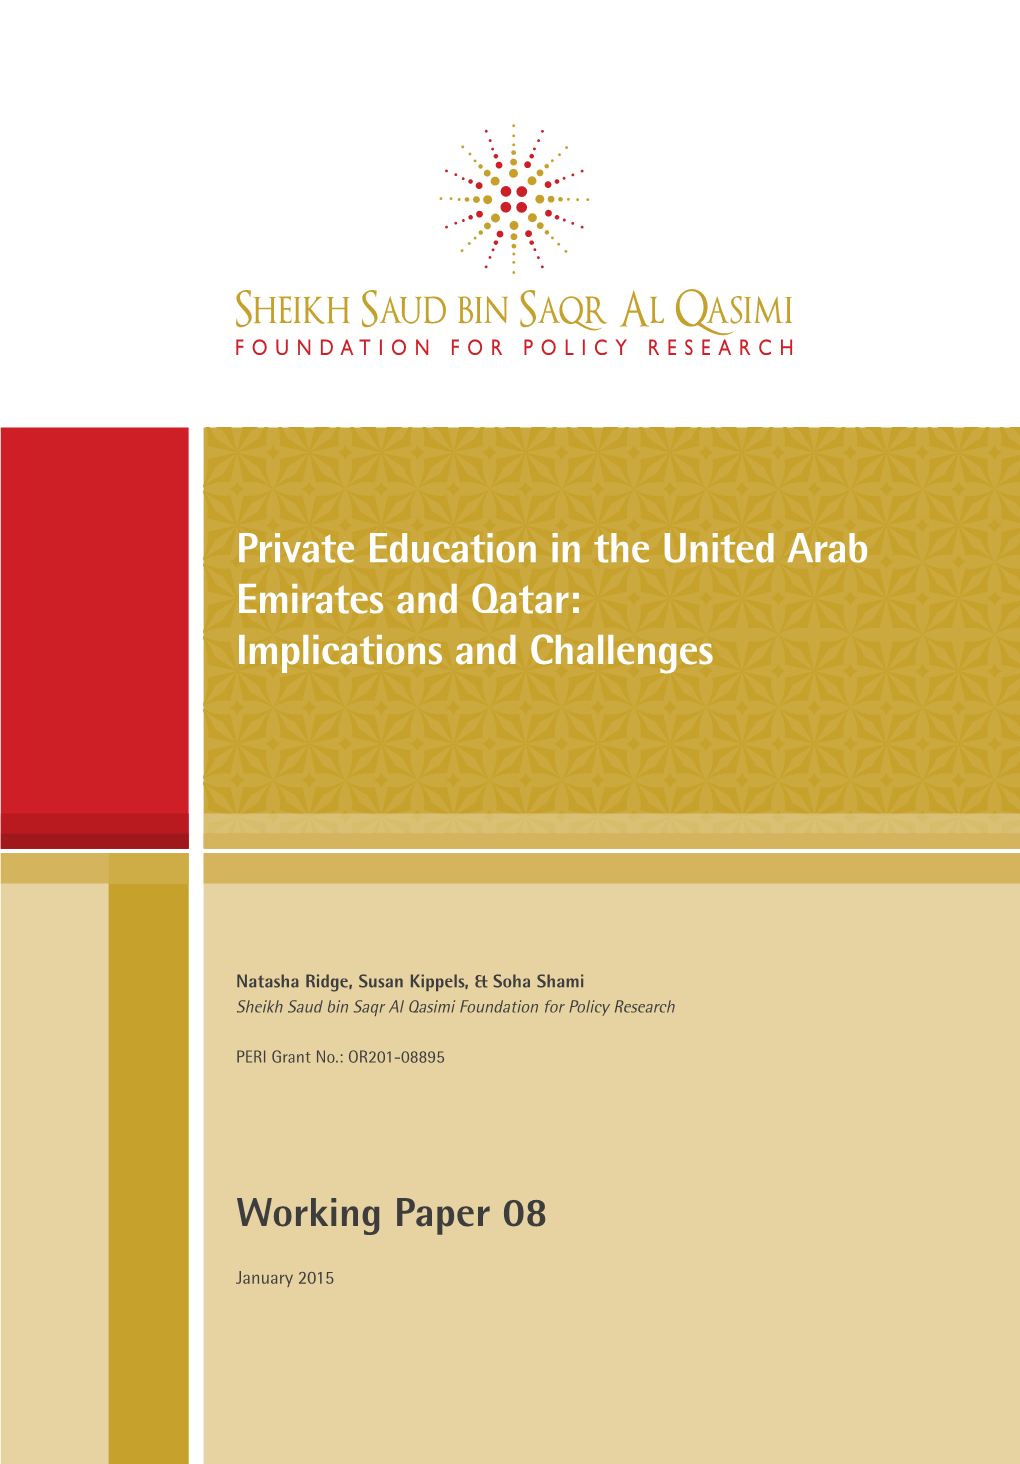 Private Education in the United Arab Emirates and Qatar: Implications and Challenges Working Paper No